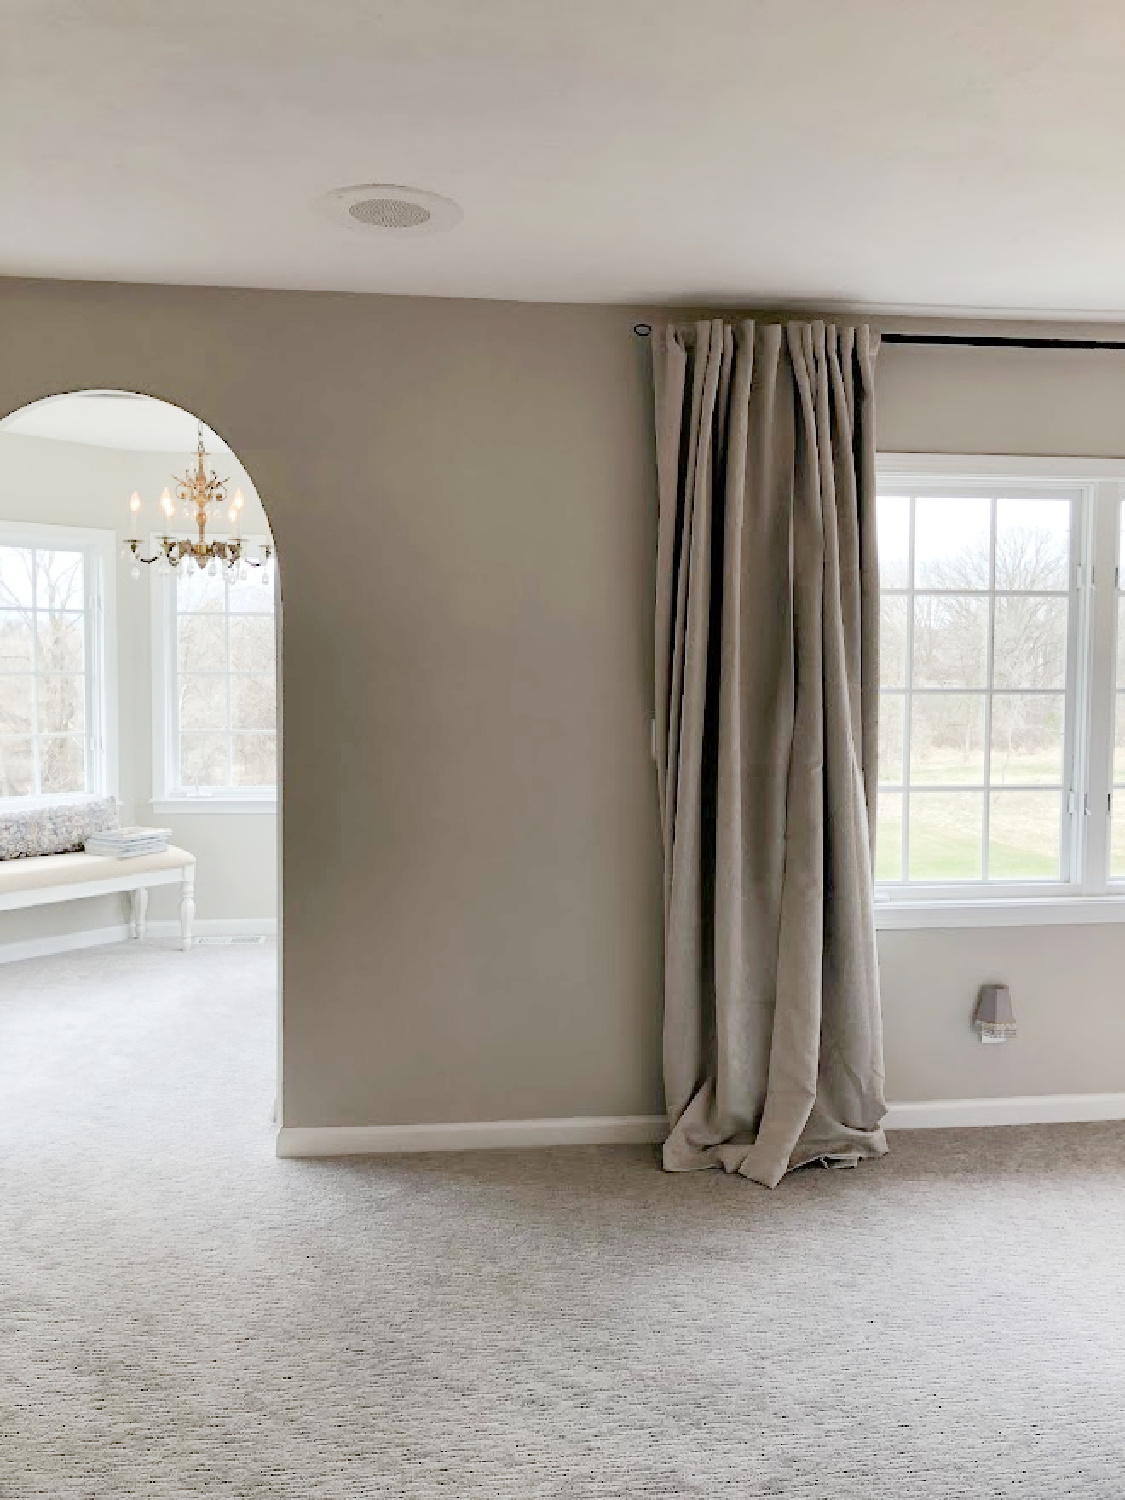 Arched doorway to sitting room in coastal bedroom remodel (SW Agreeable Gray on walls) at the Georgian - Hello Lovely Studio. #agreeablegray #swagreeablegray